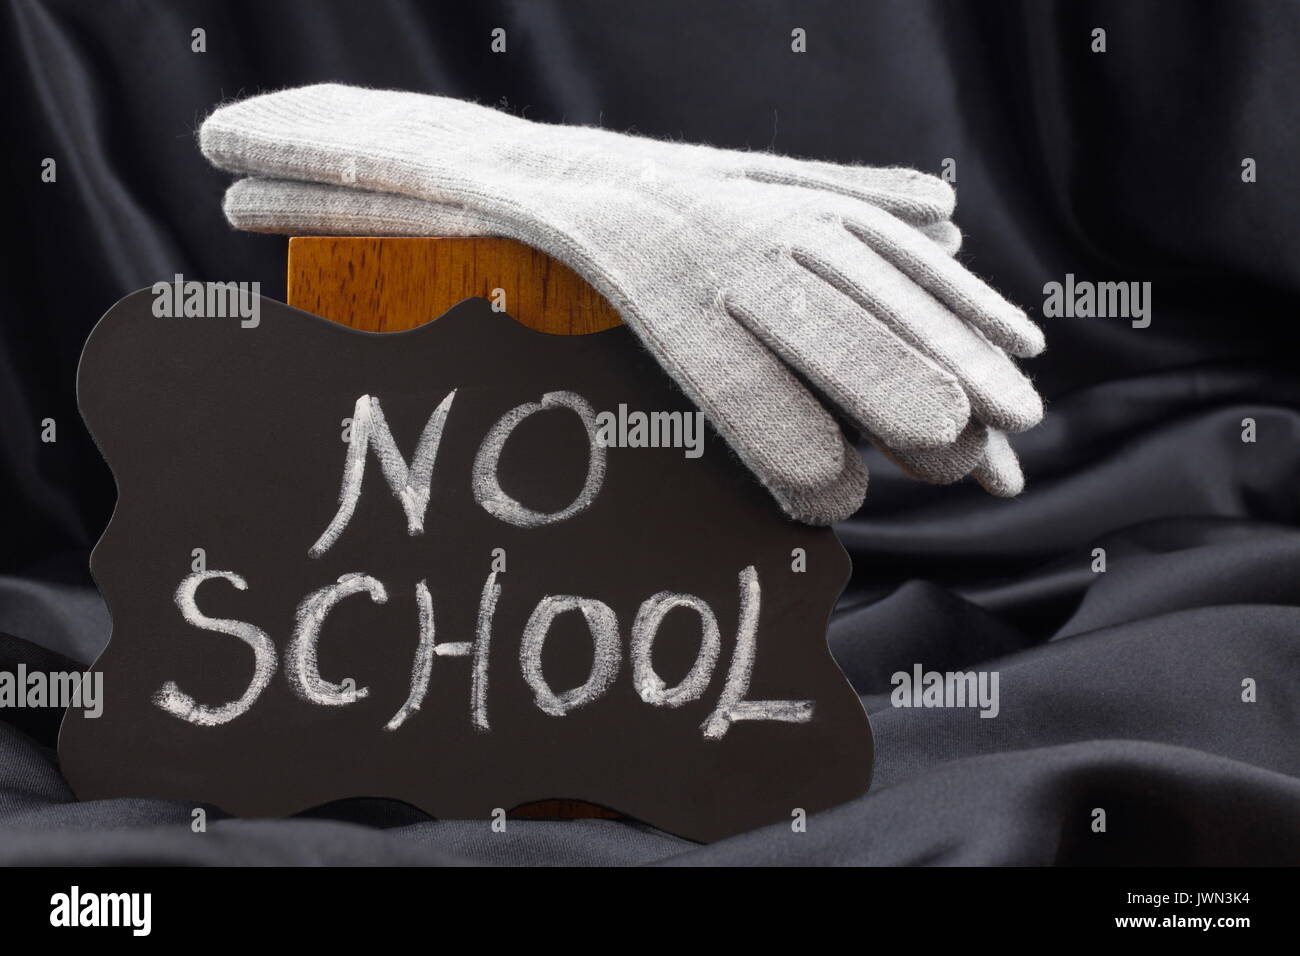 Announcement of NO SCHOOL on chalkboard notifies of winter weather closing. Stock Photo